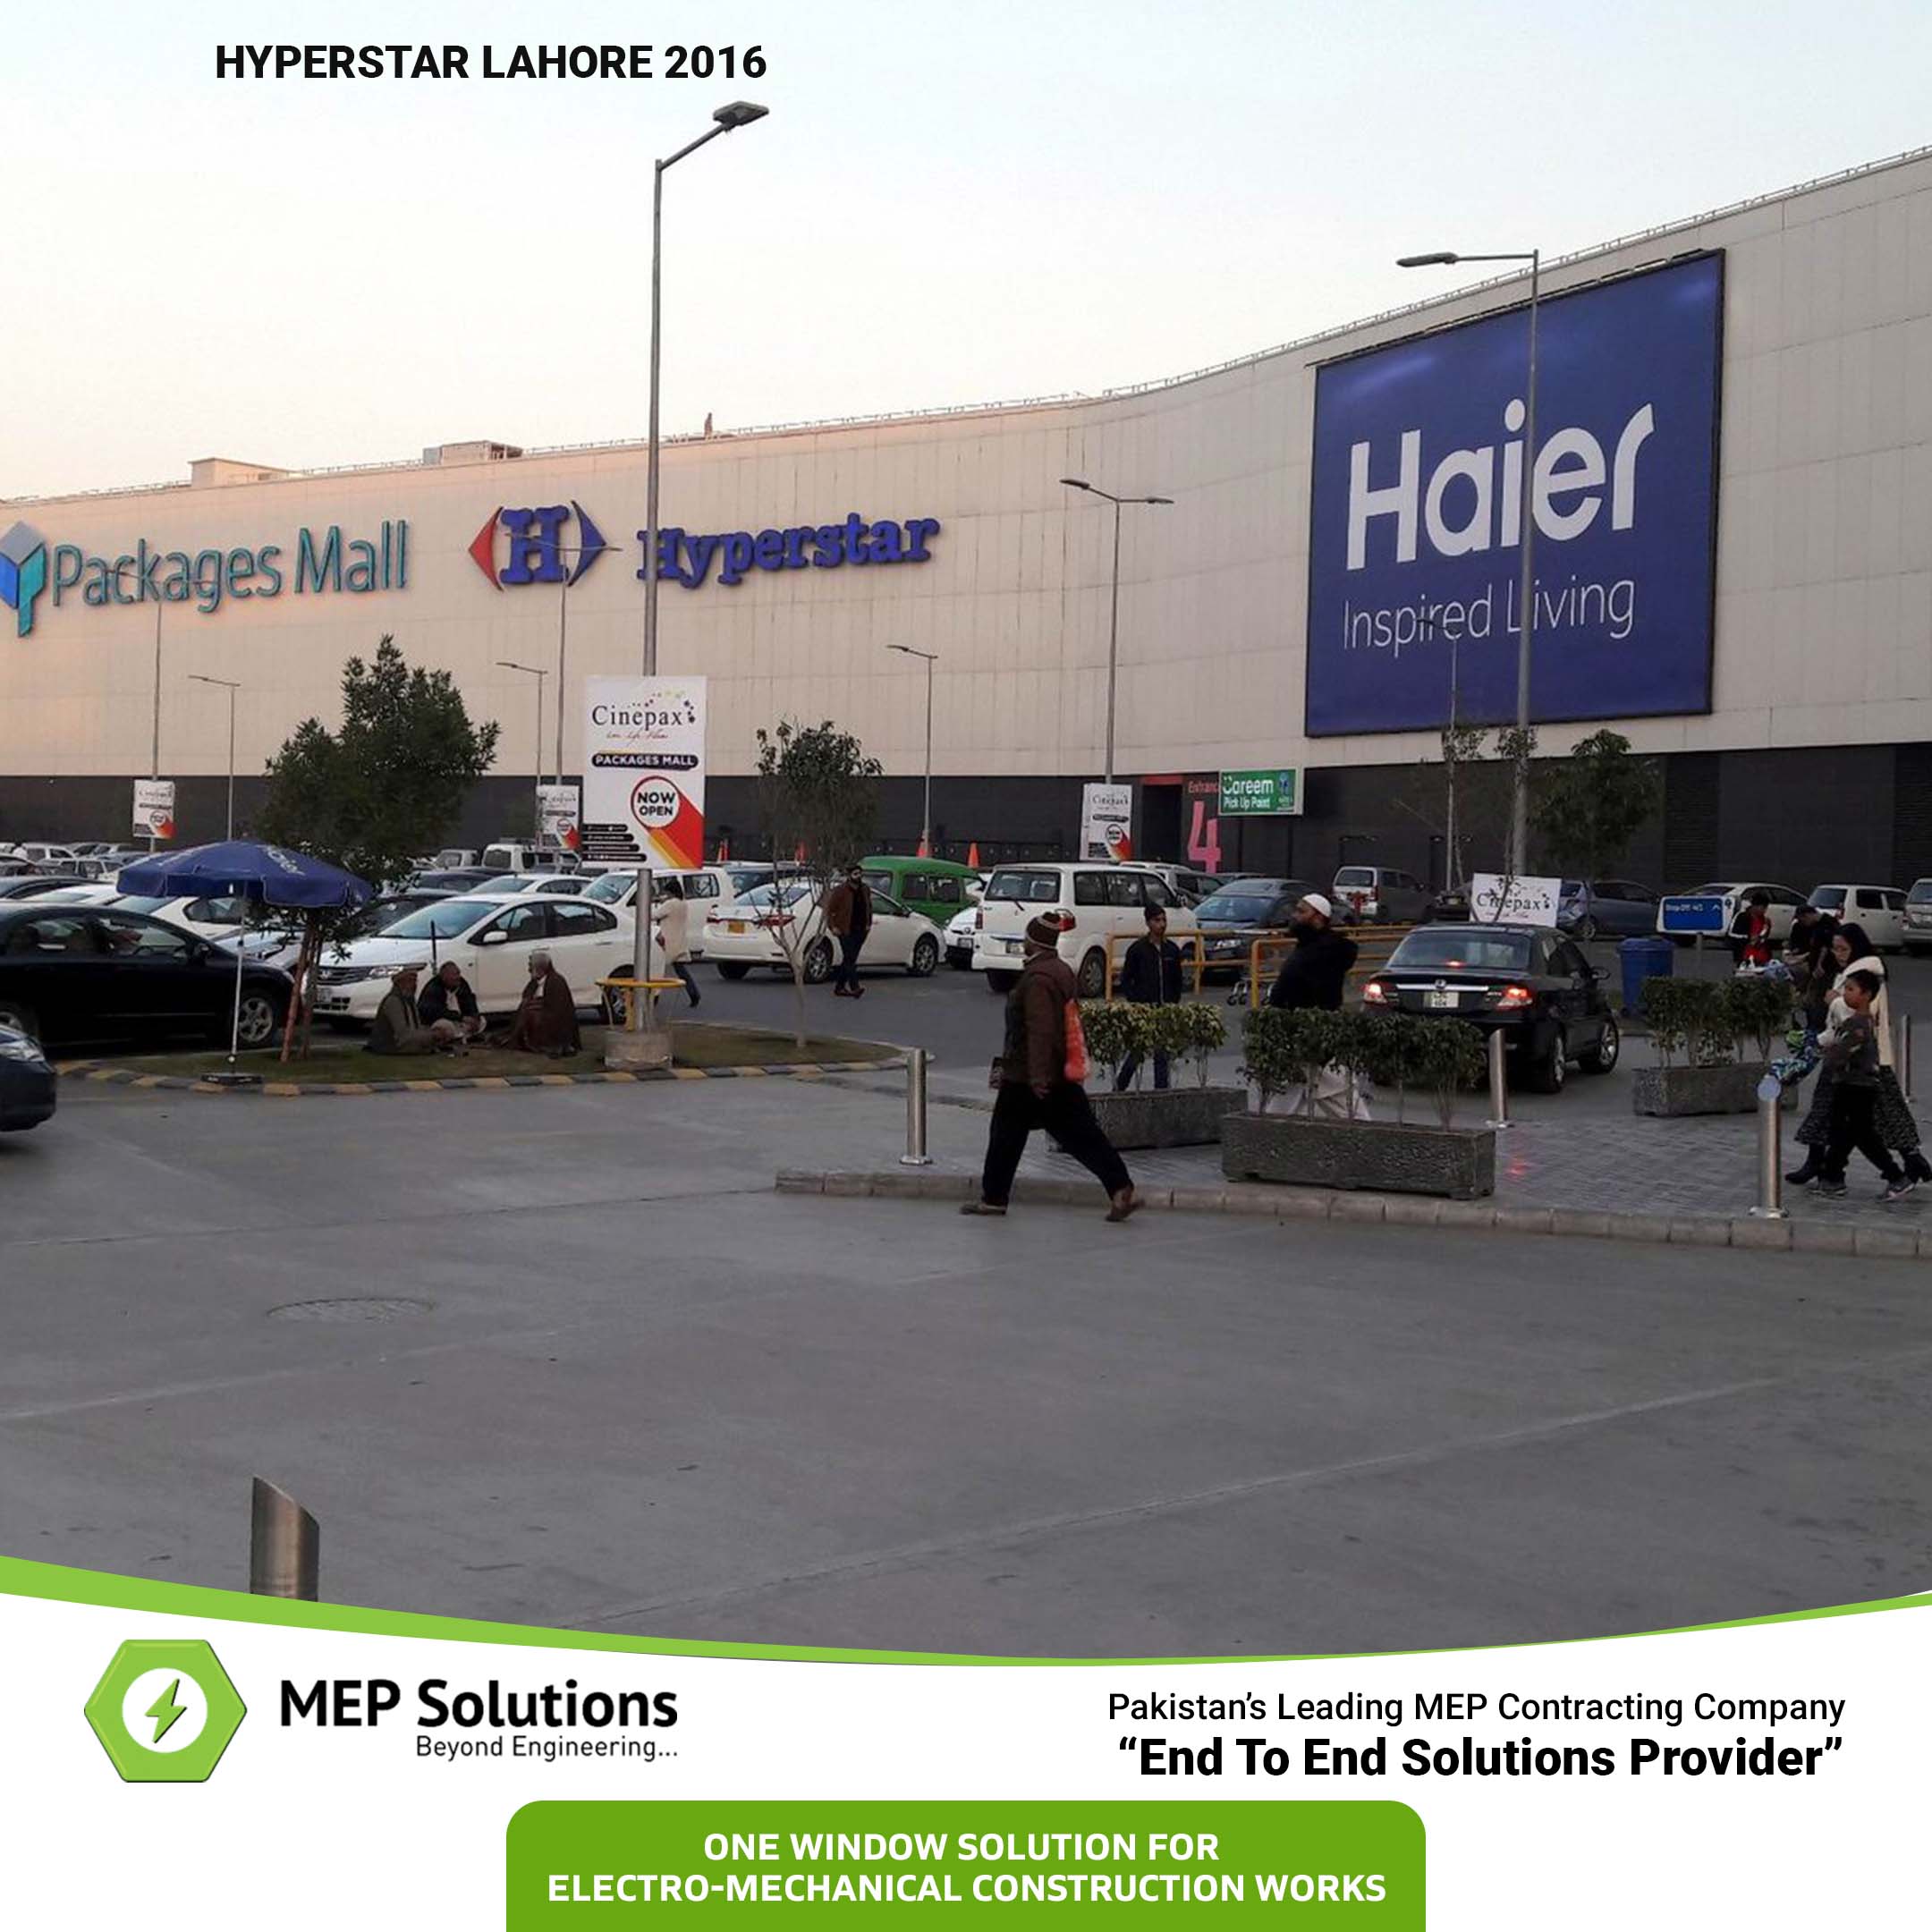 HYPERSTAR IN  PACKAGES MALL